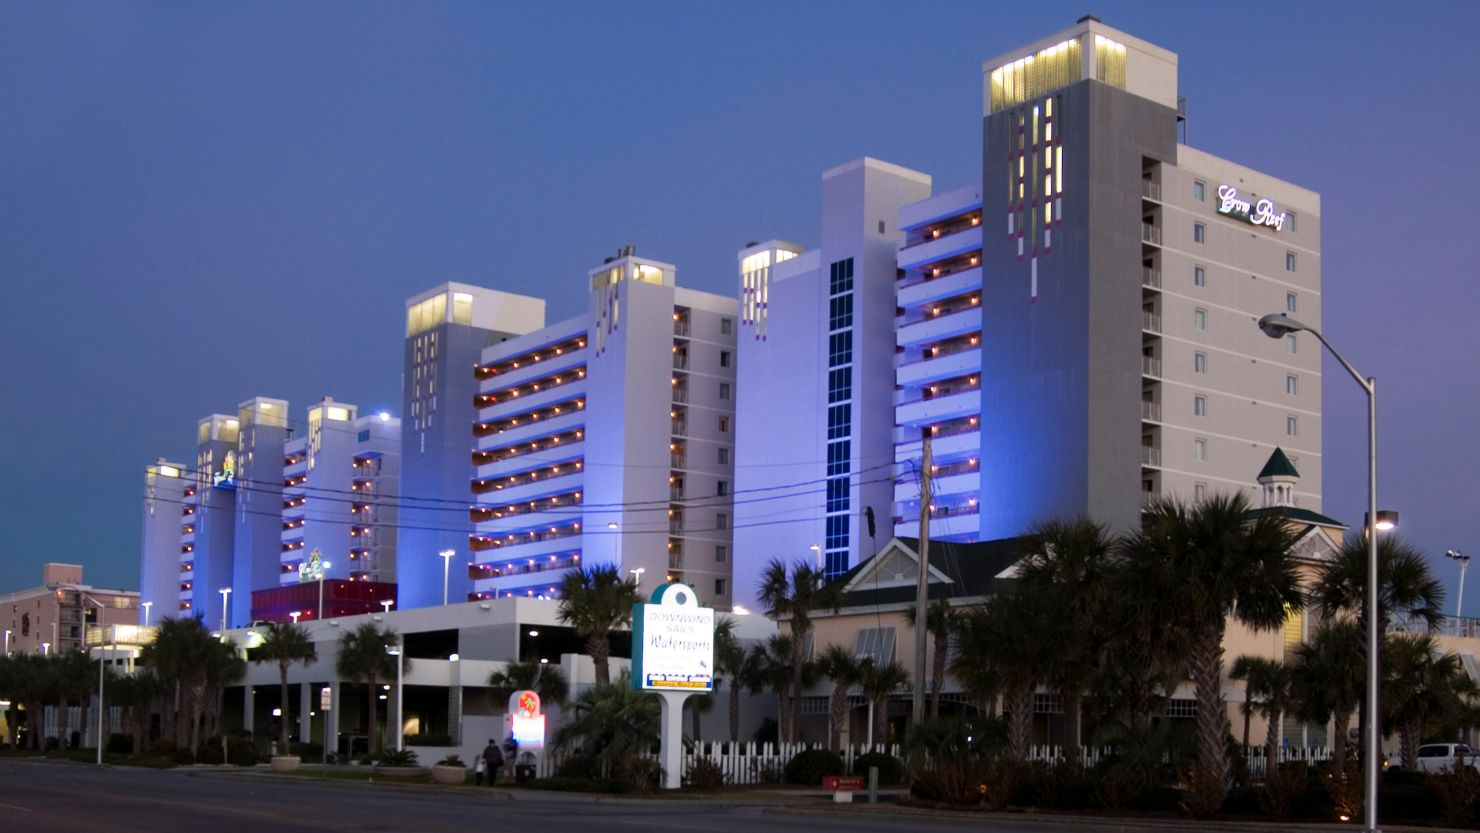 Crown Reef resort and hotel at South Myrtle Beach, South Carolina.